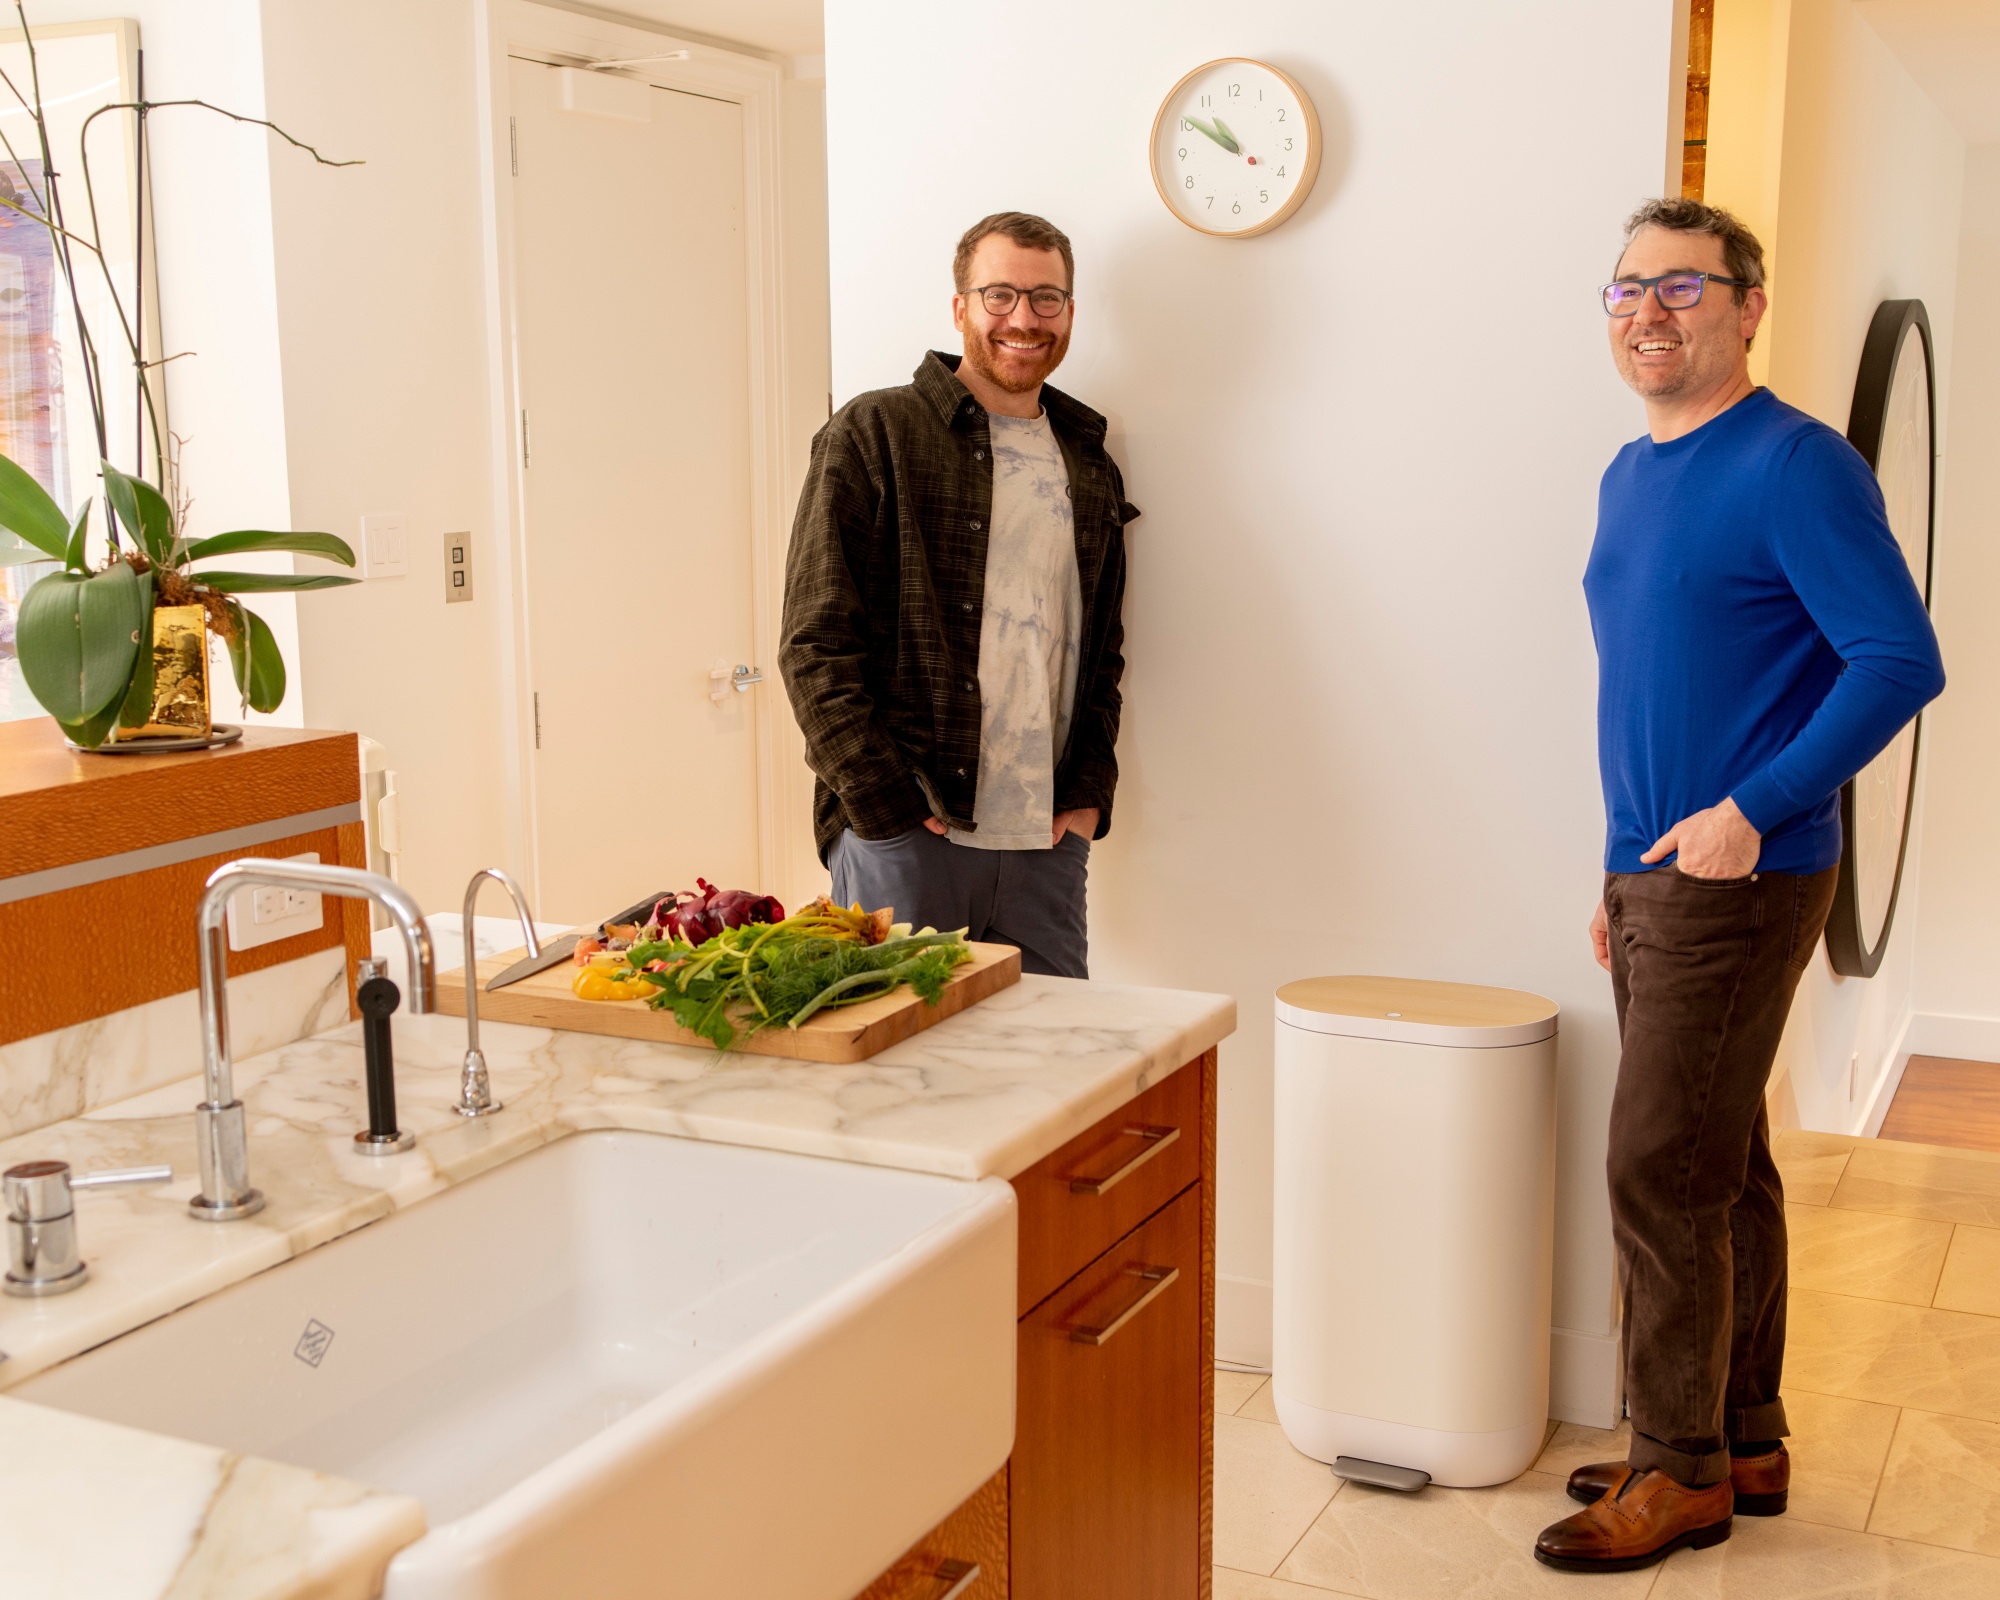 Tomorrow's kitchen today: It's all about the internet of things